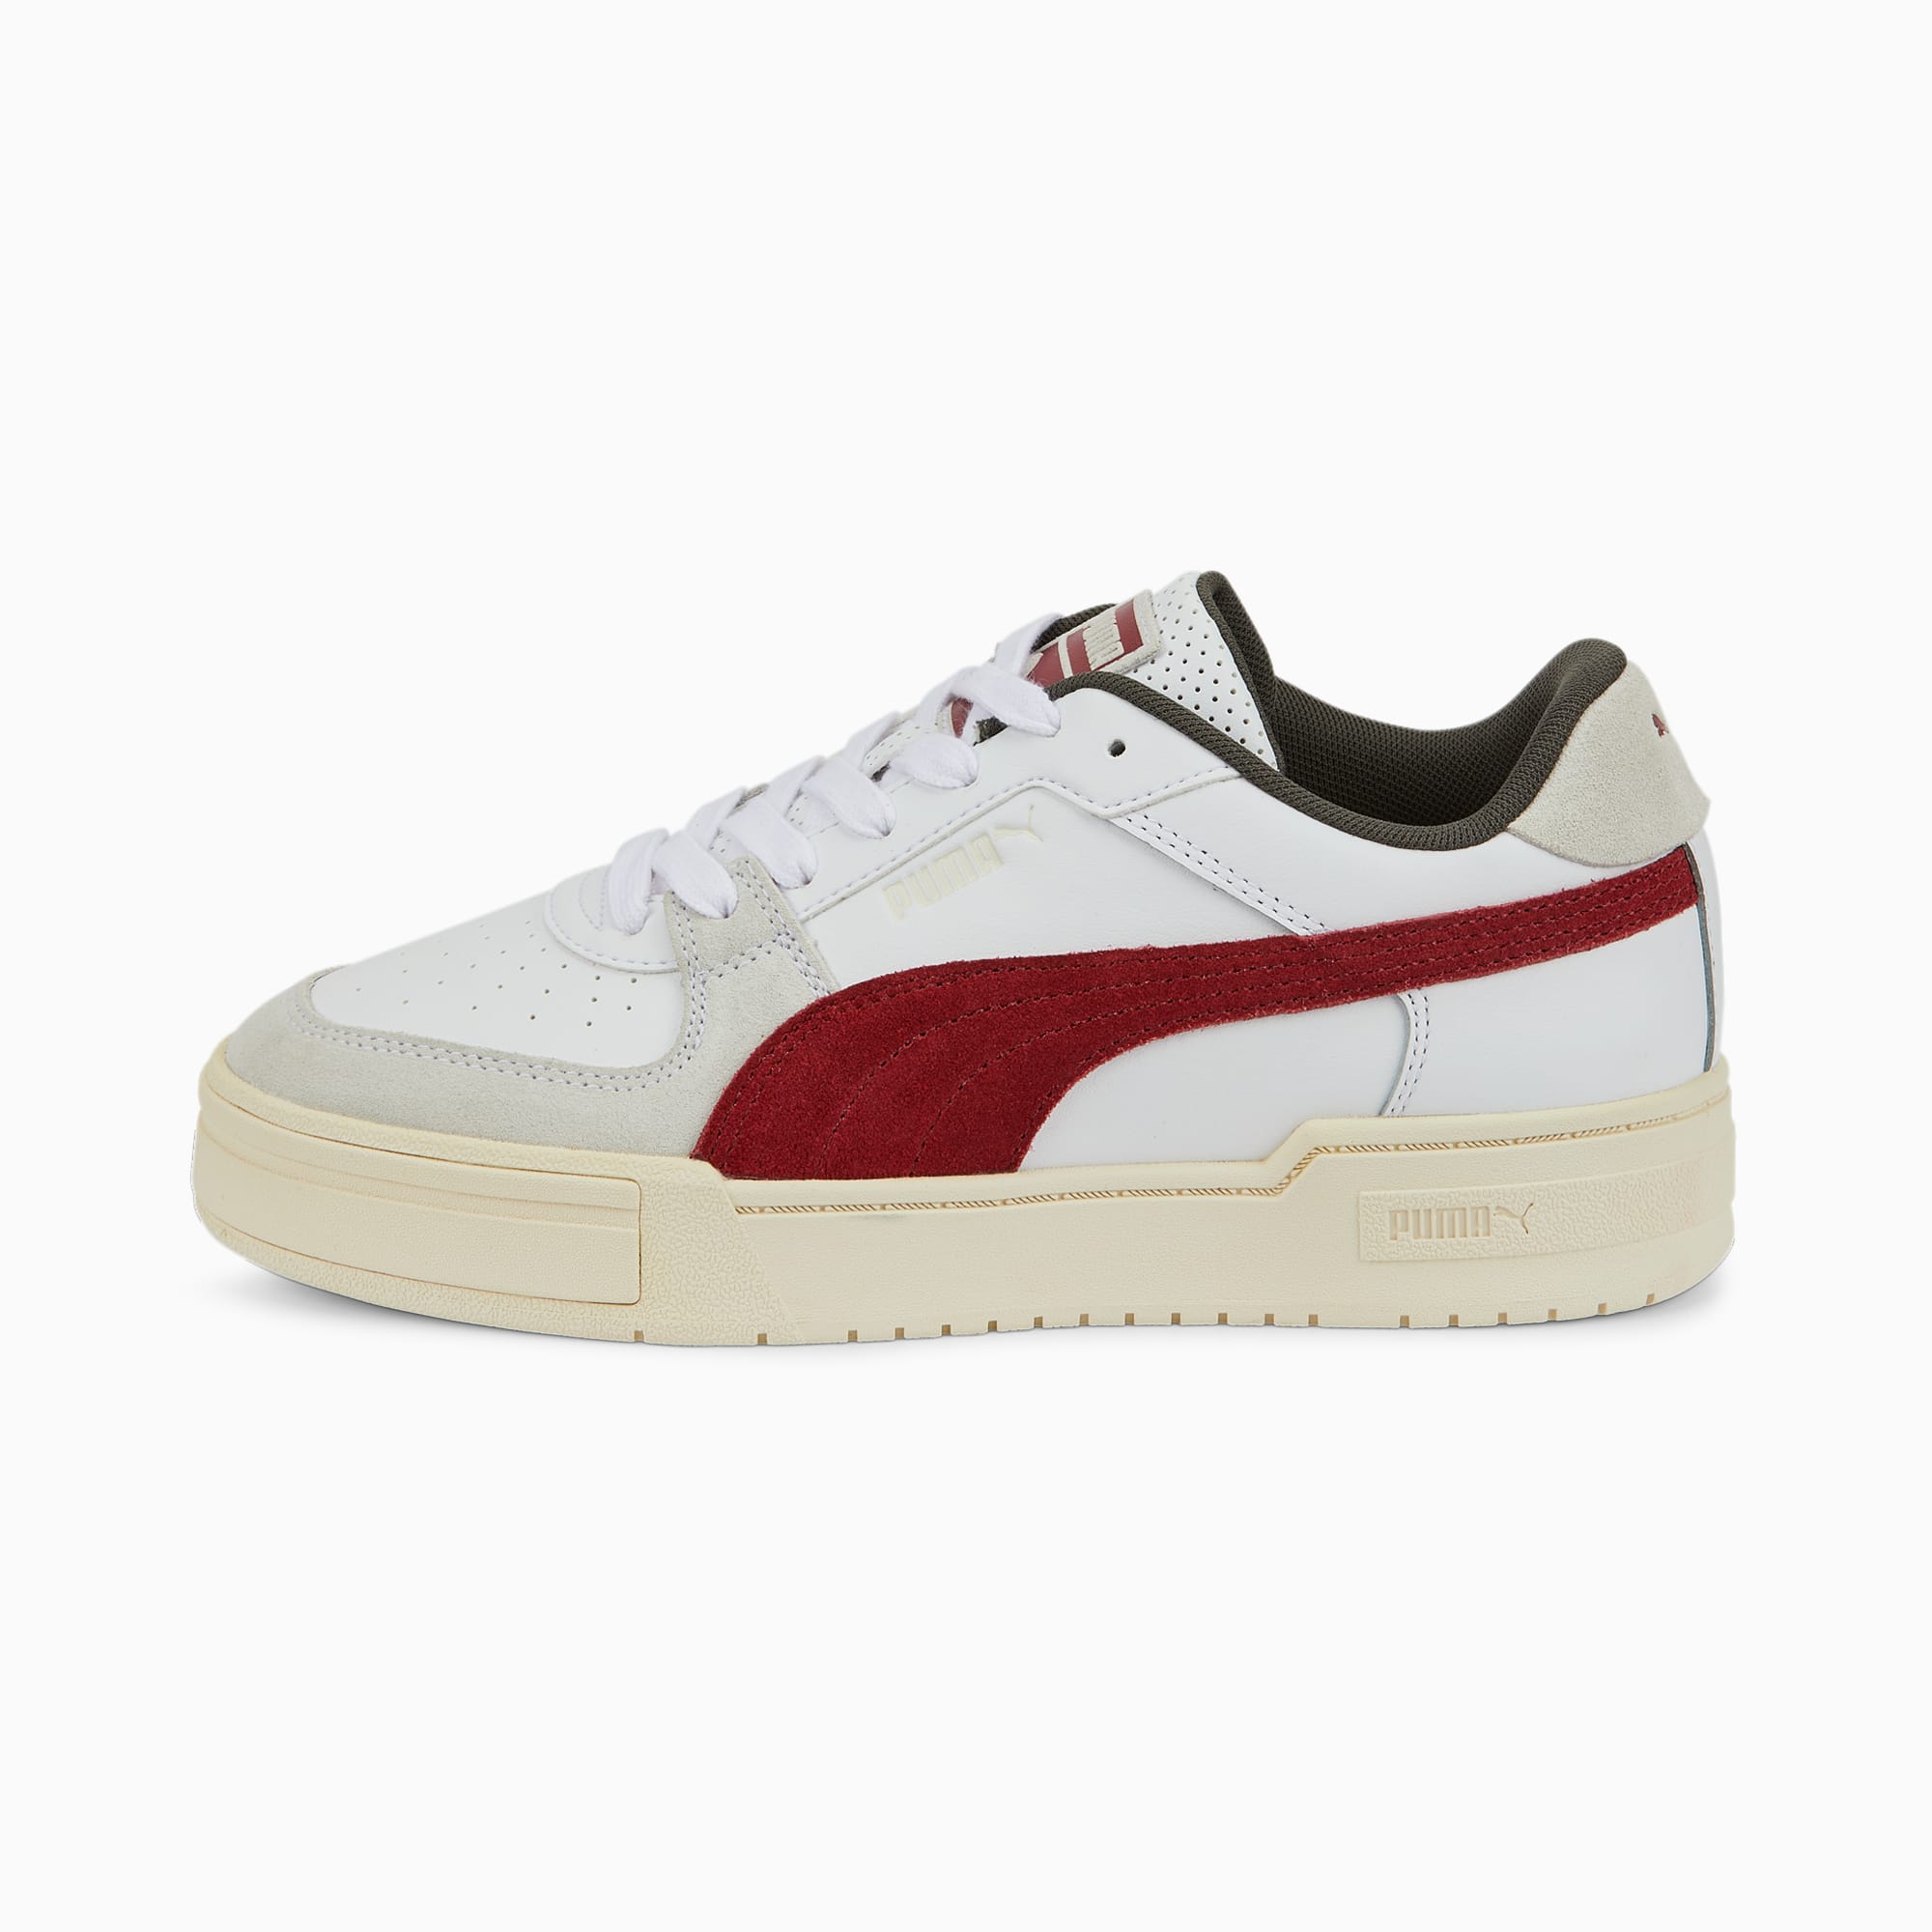 CA Pro Ivy League sneakers